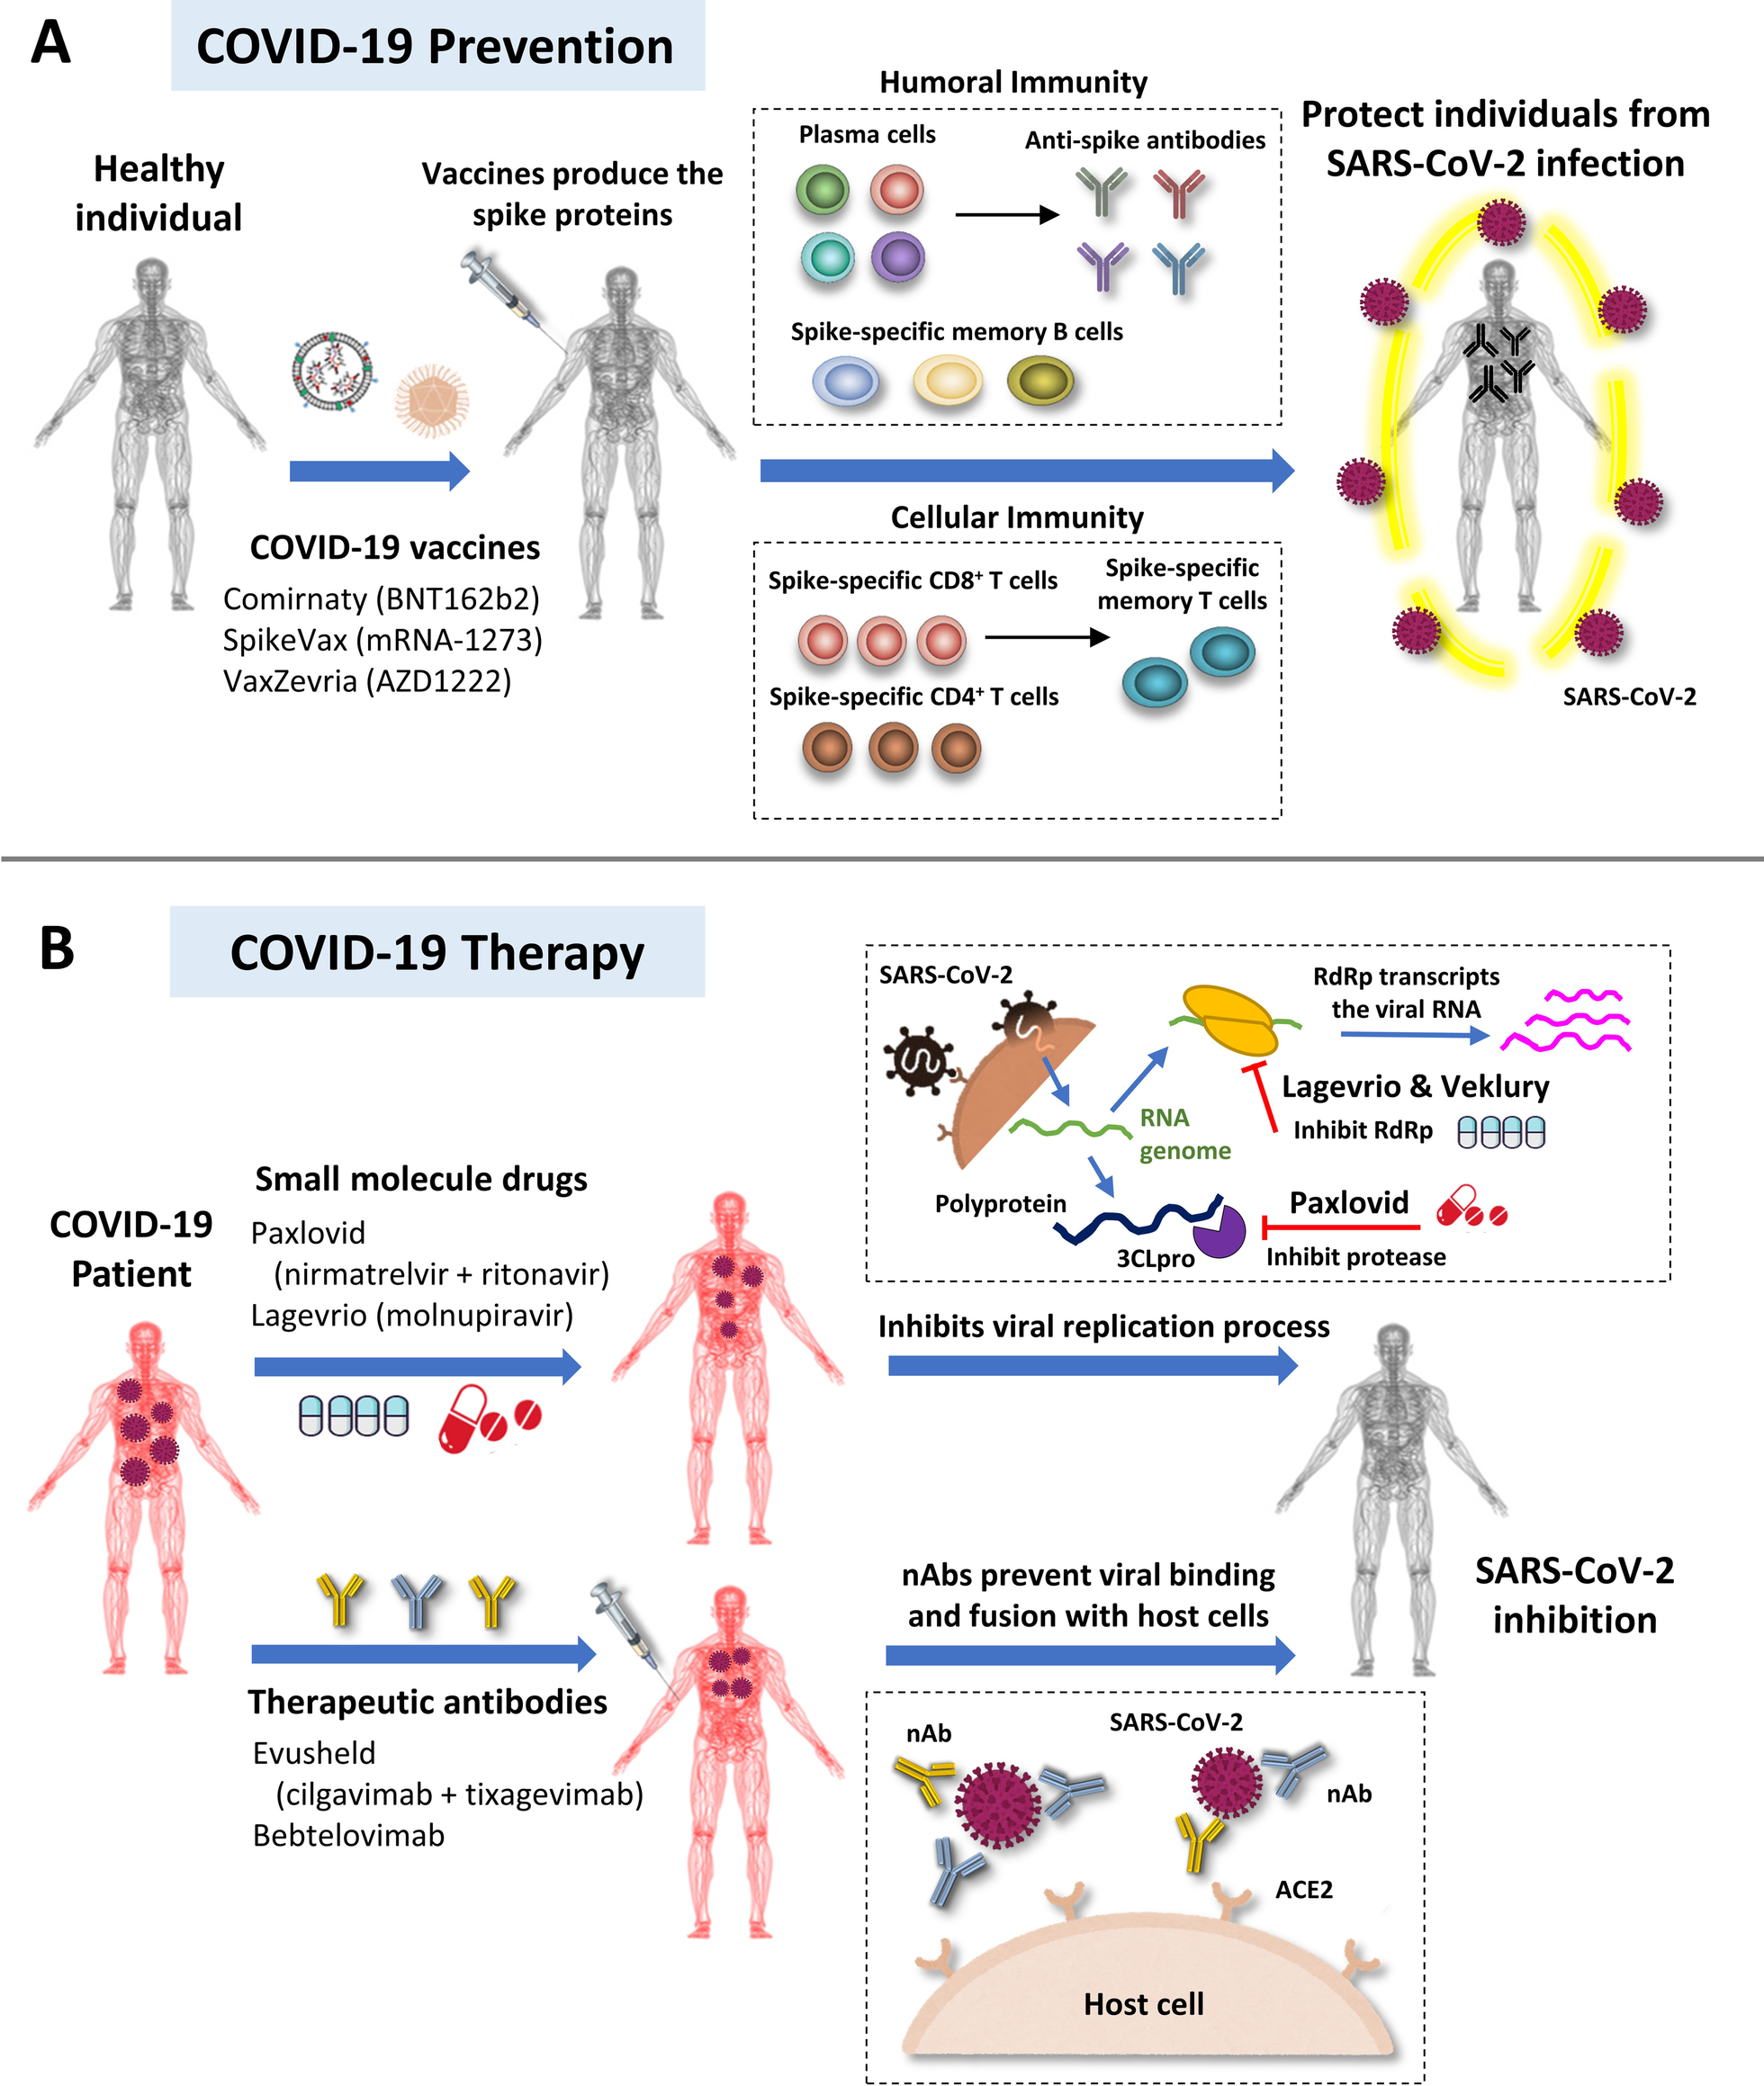 A critical overview of current progress for COVID-19: development of vaccines, antiviral drugs, and therapeutic antibodies